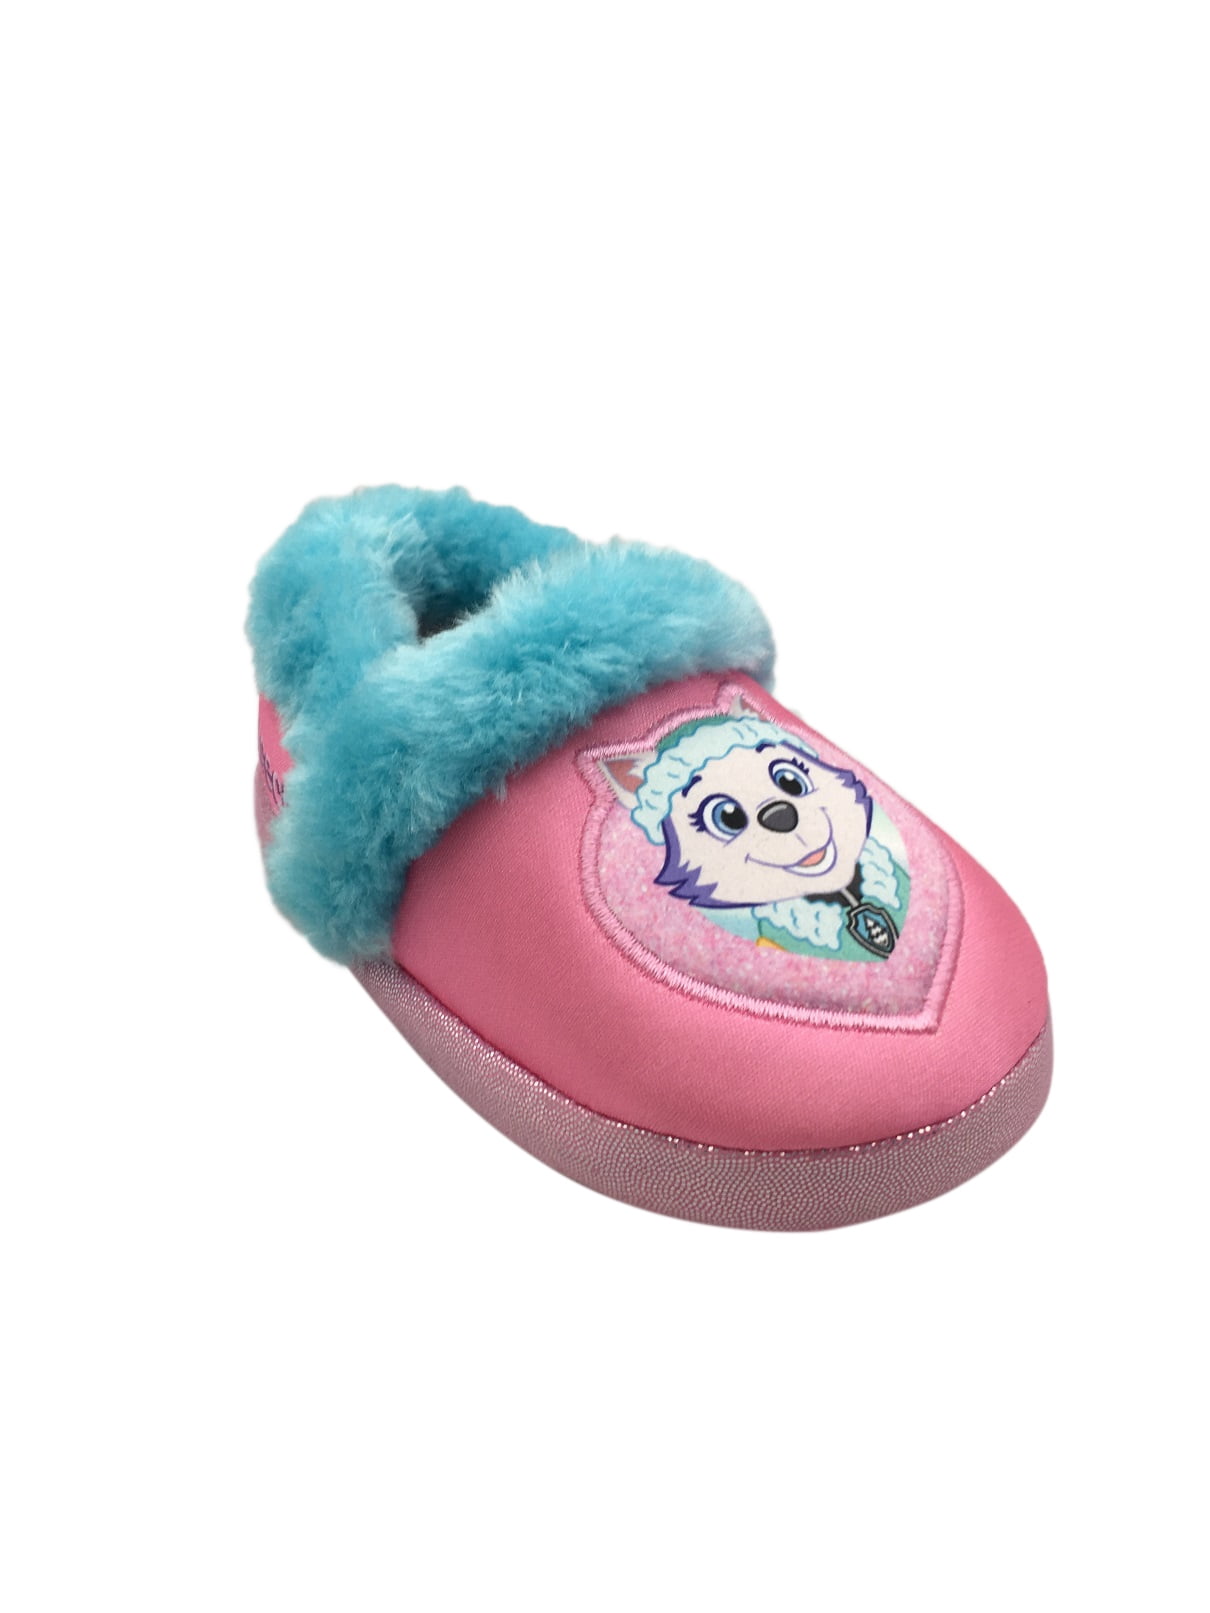 Paw Patrol Toddler Girl Slippers House Shoes Size 2T-3T Fits Shoe Size 4.5-8 New 